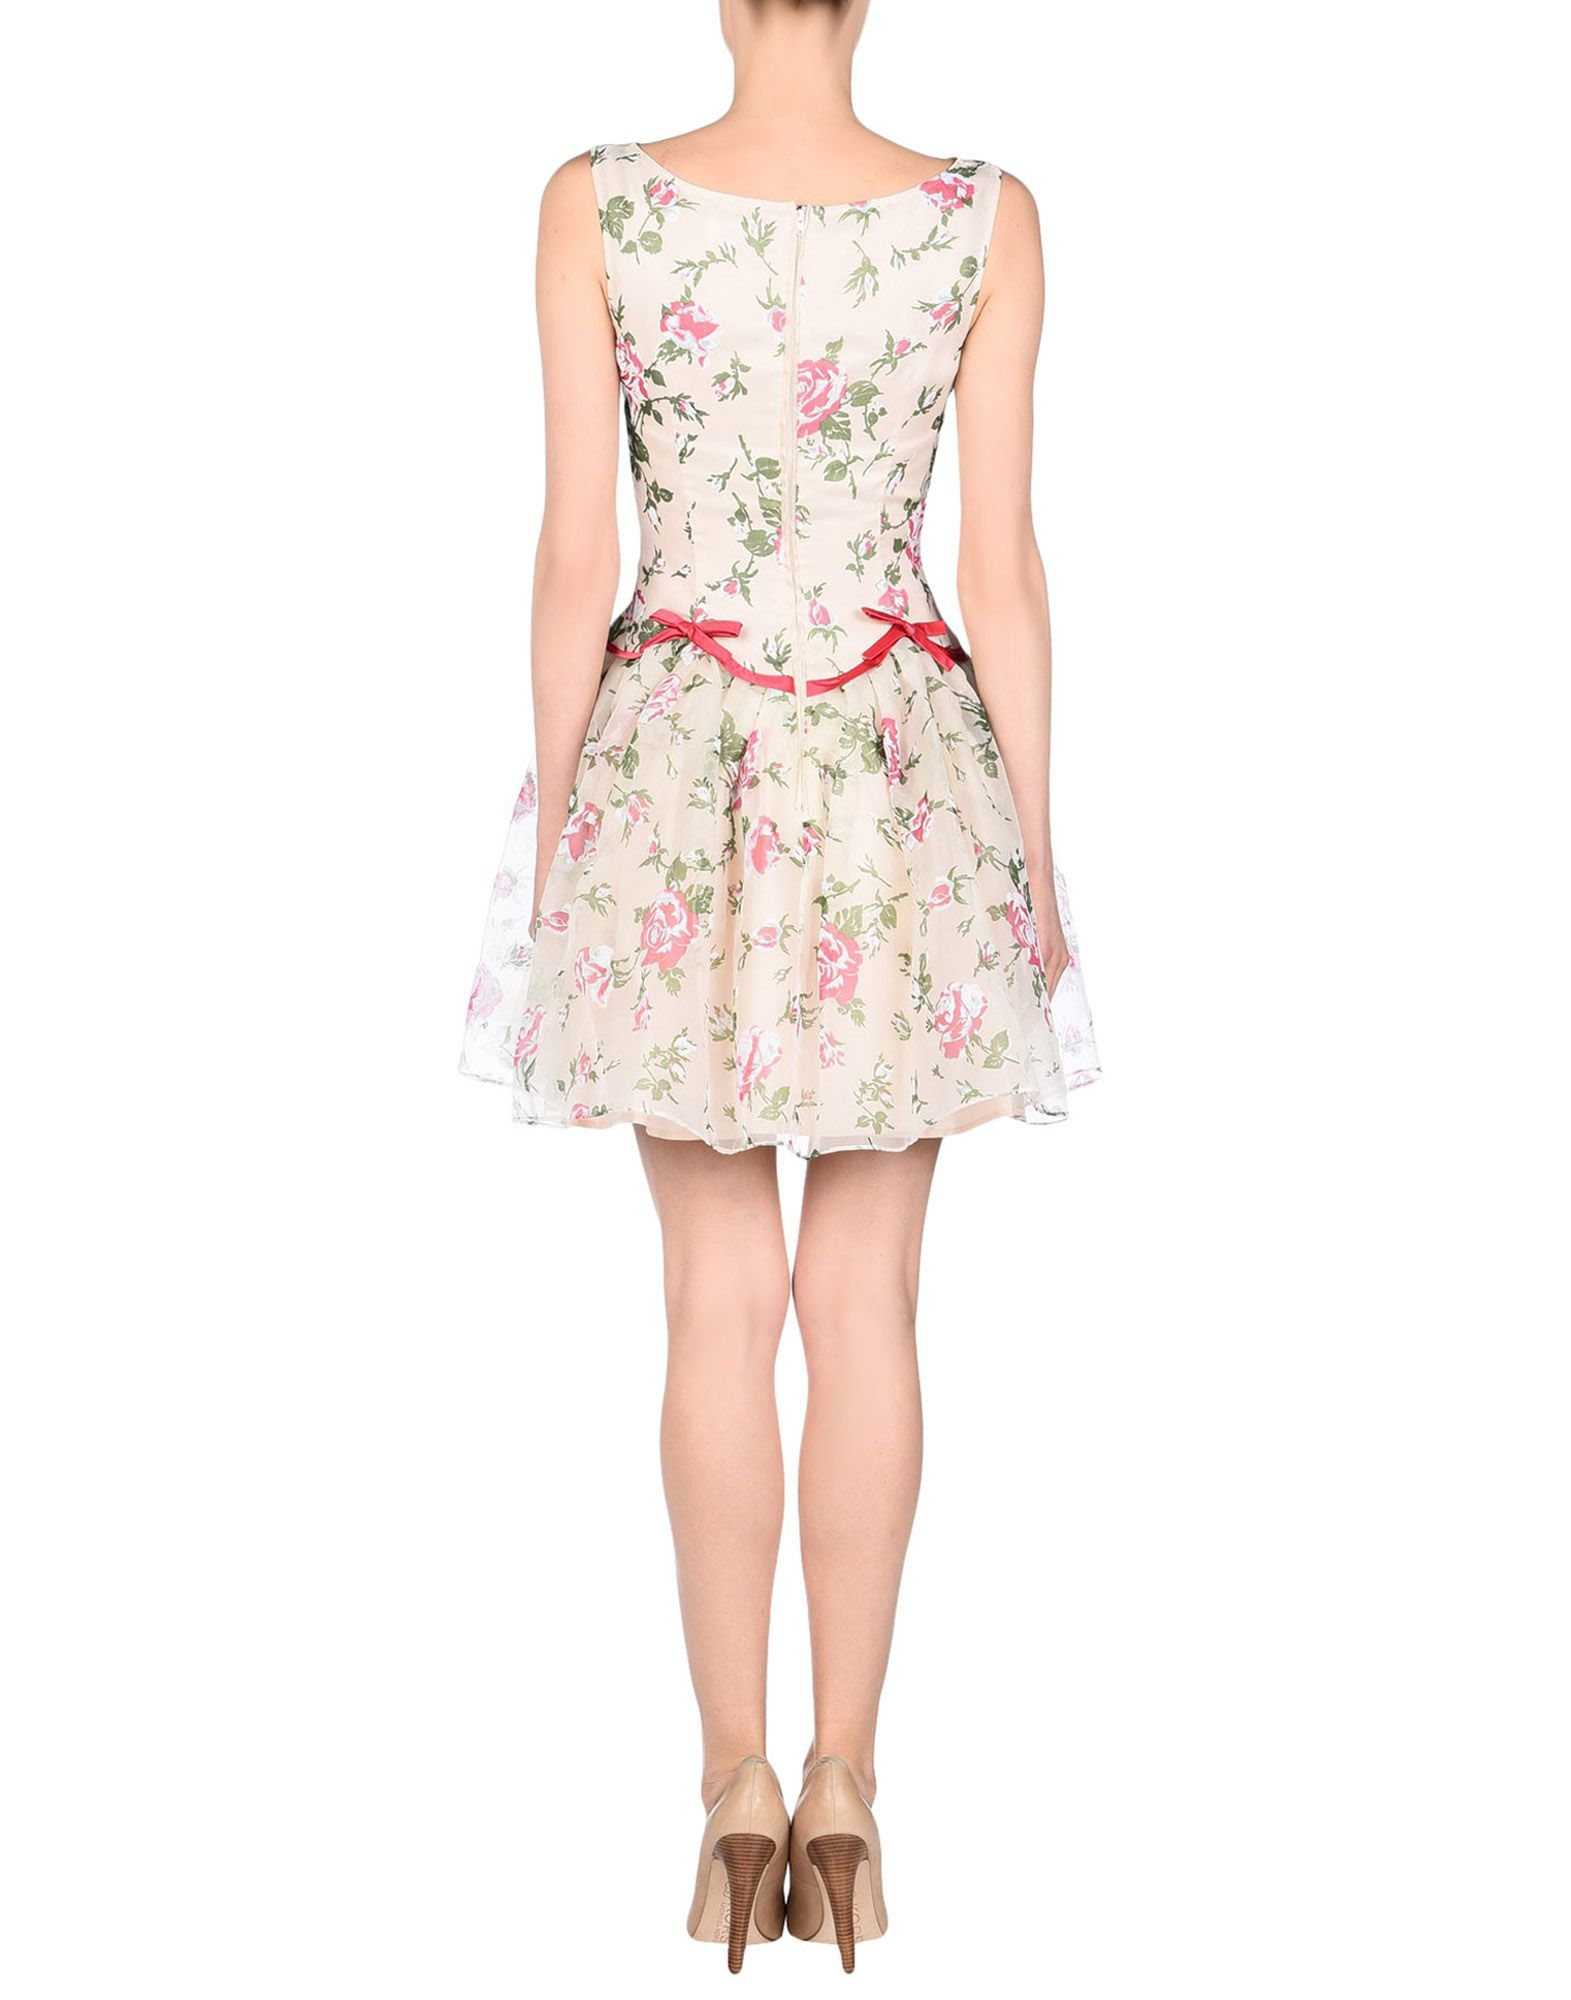 Lyst - Red Valentino Short Dress in Natural